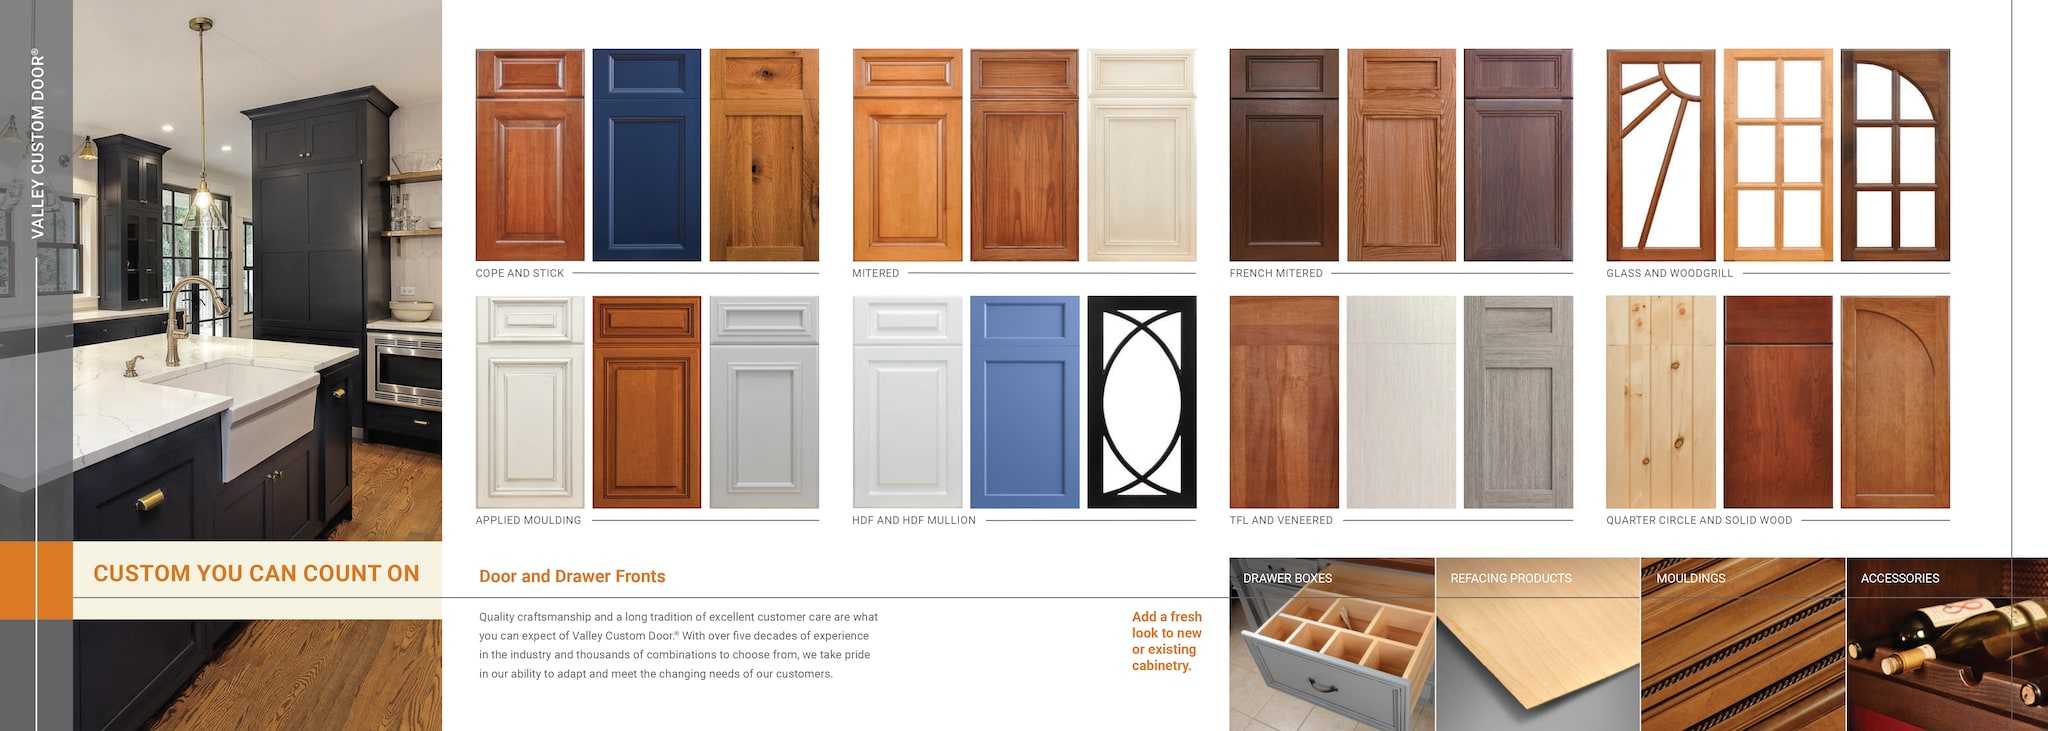 Valley Cabinet product brochure by Element